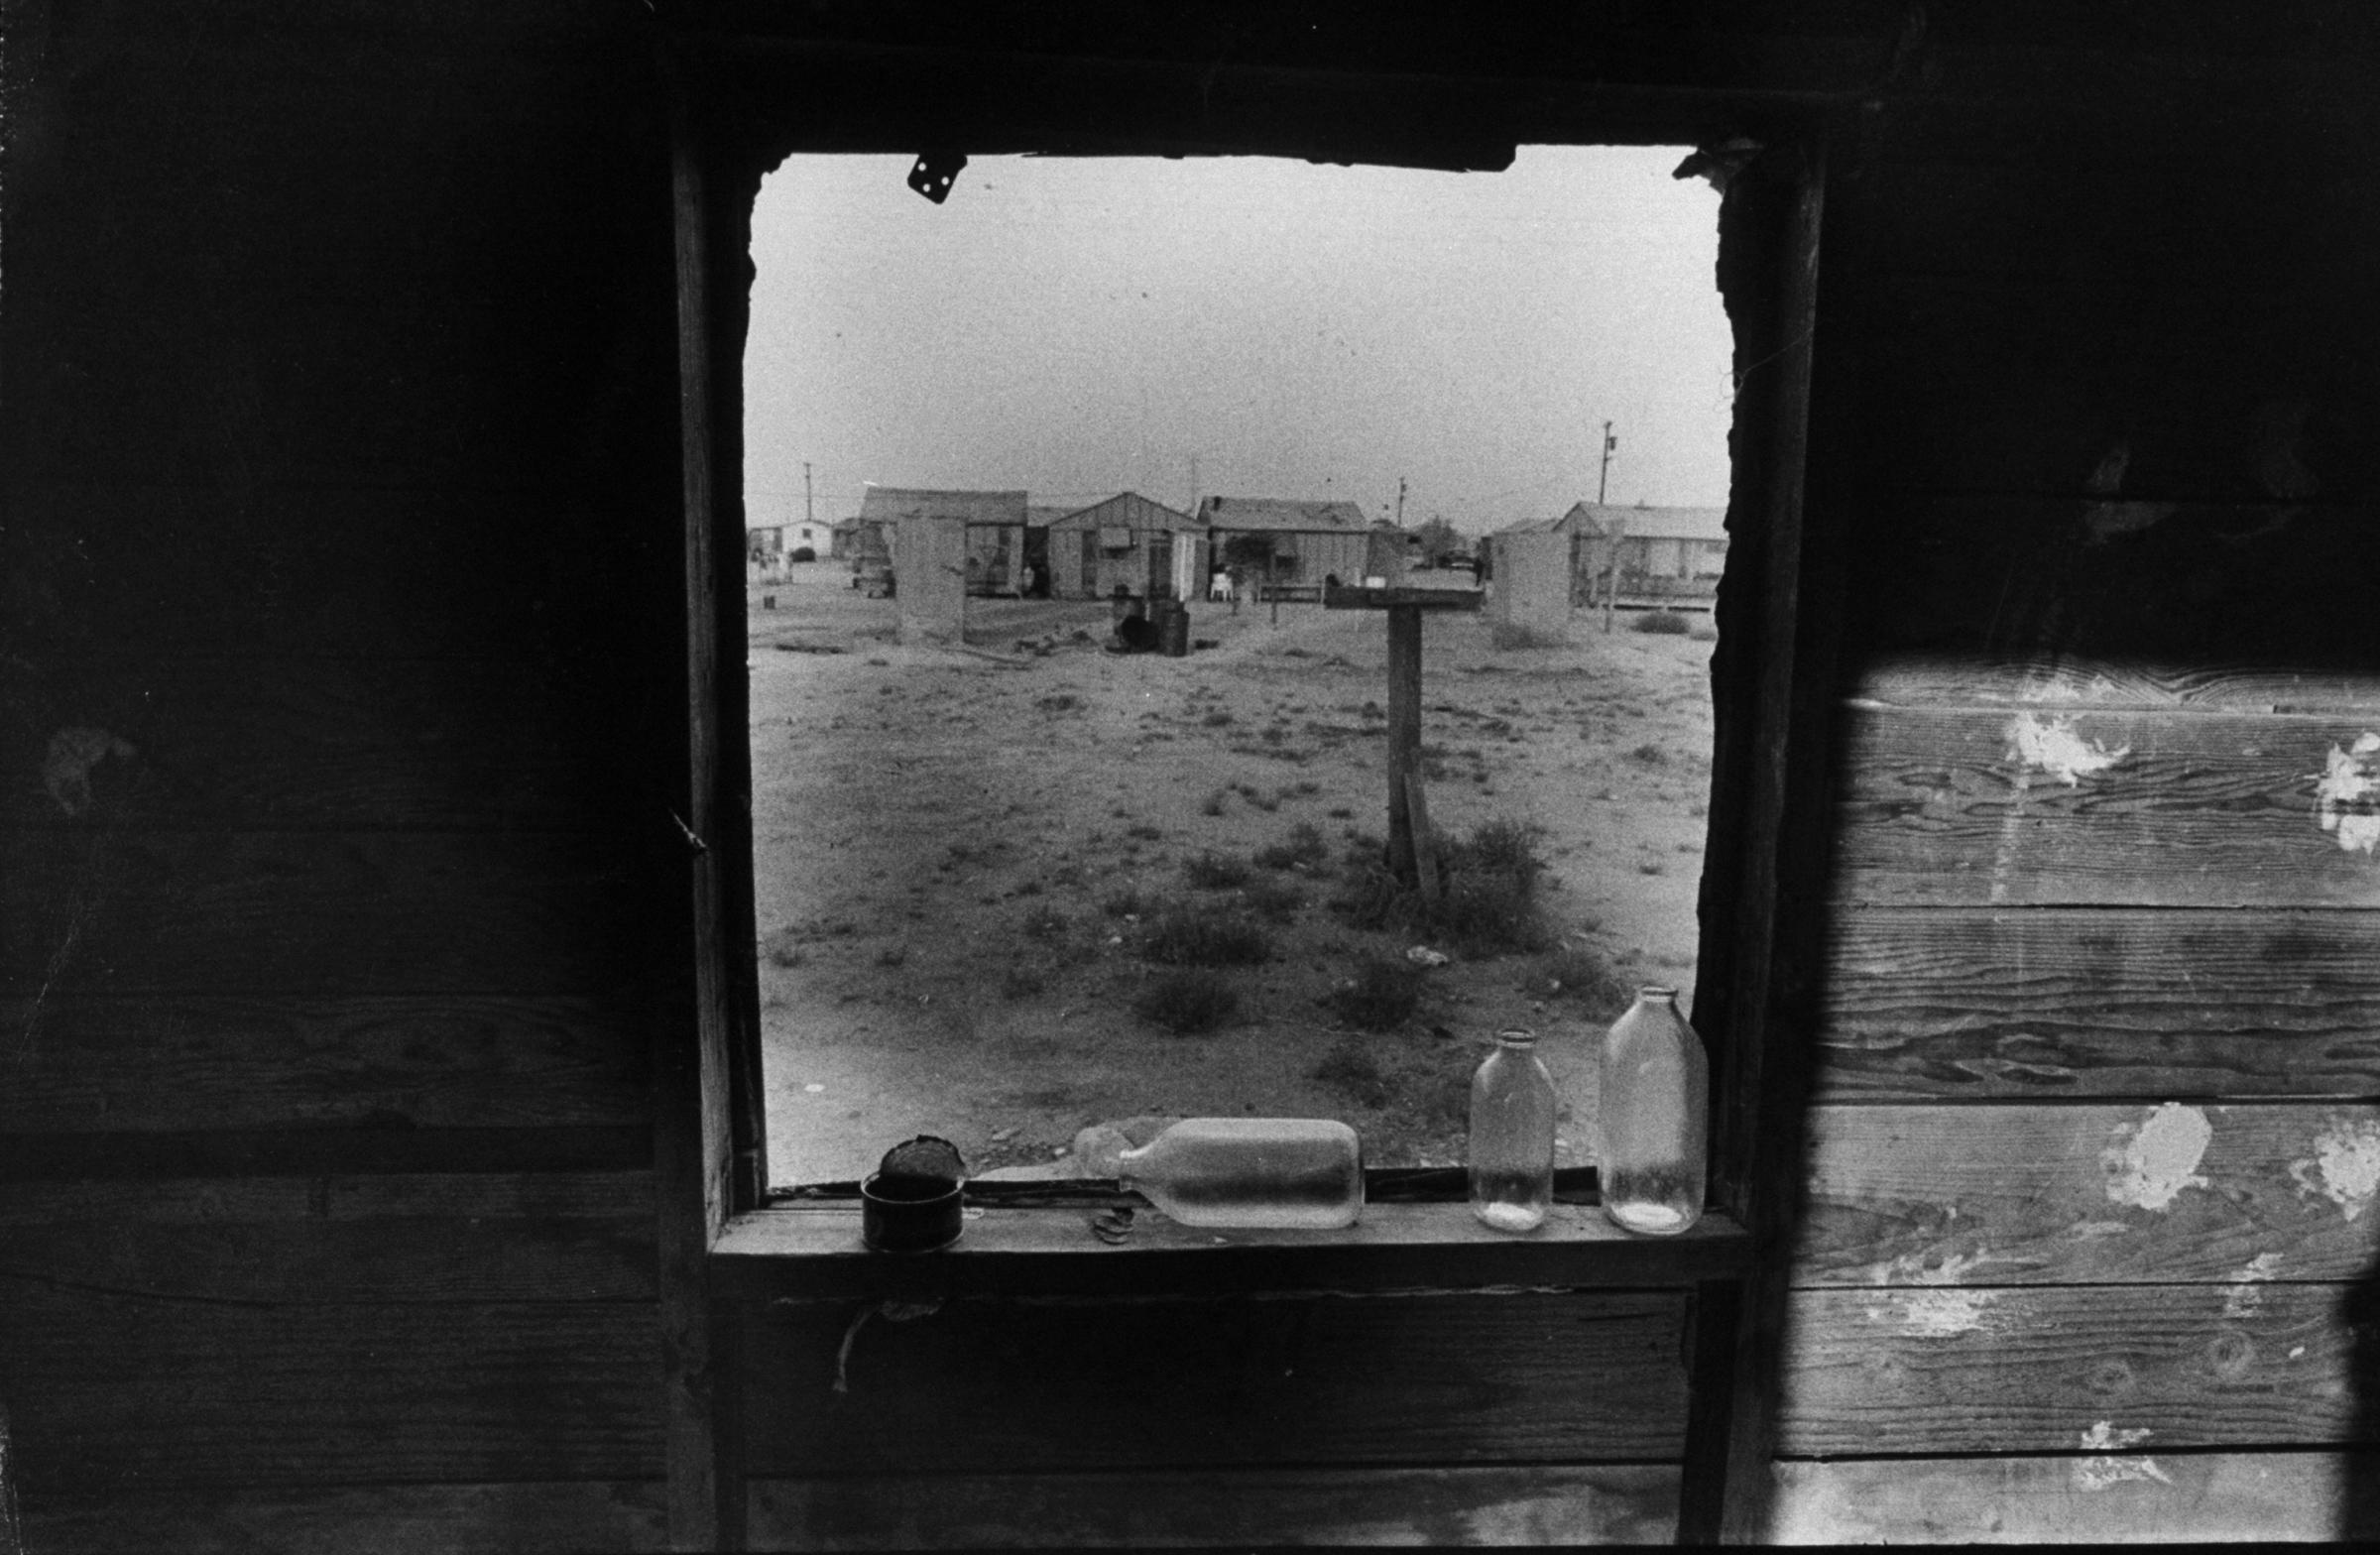 Migratory farm workers and their families living in squalid conditions, California, 1959.